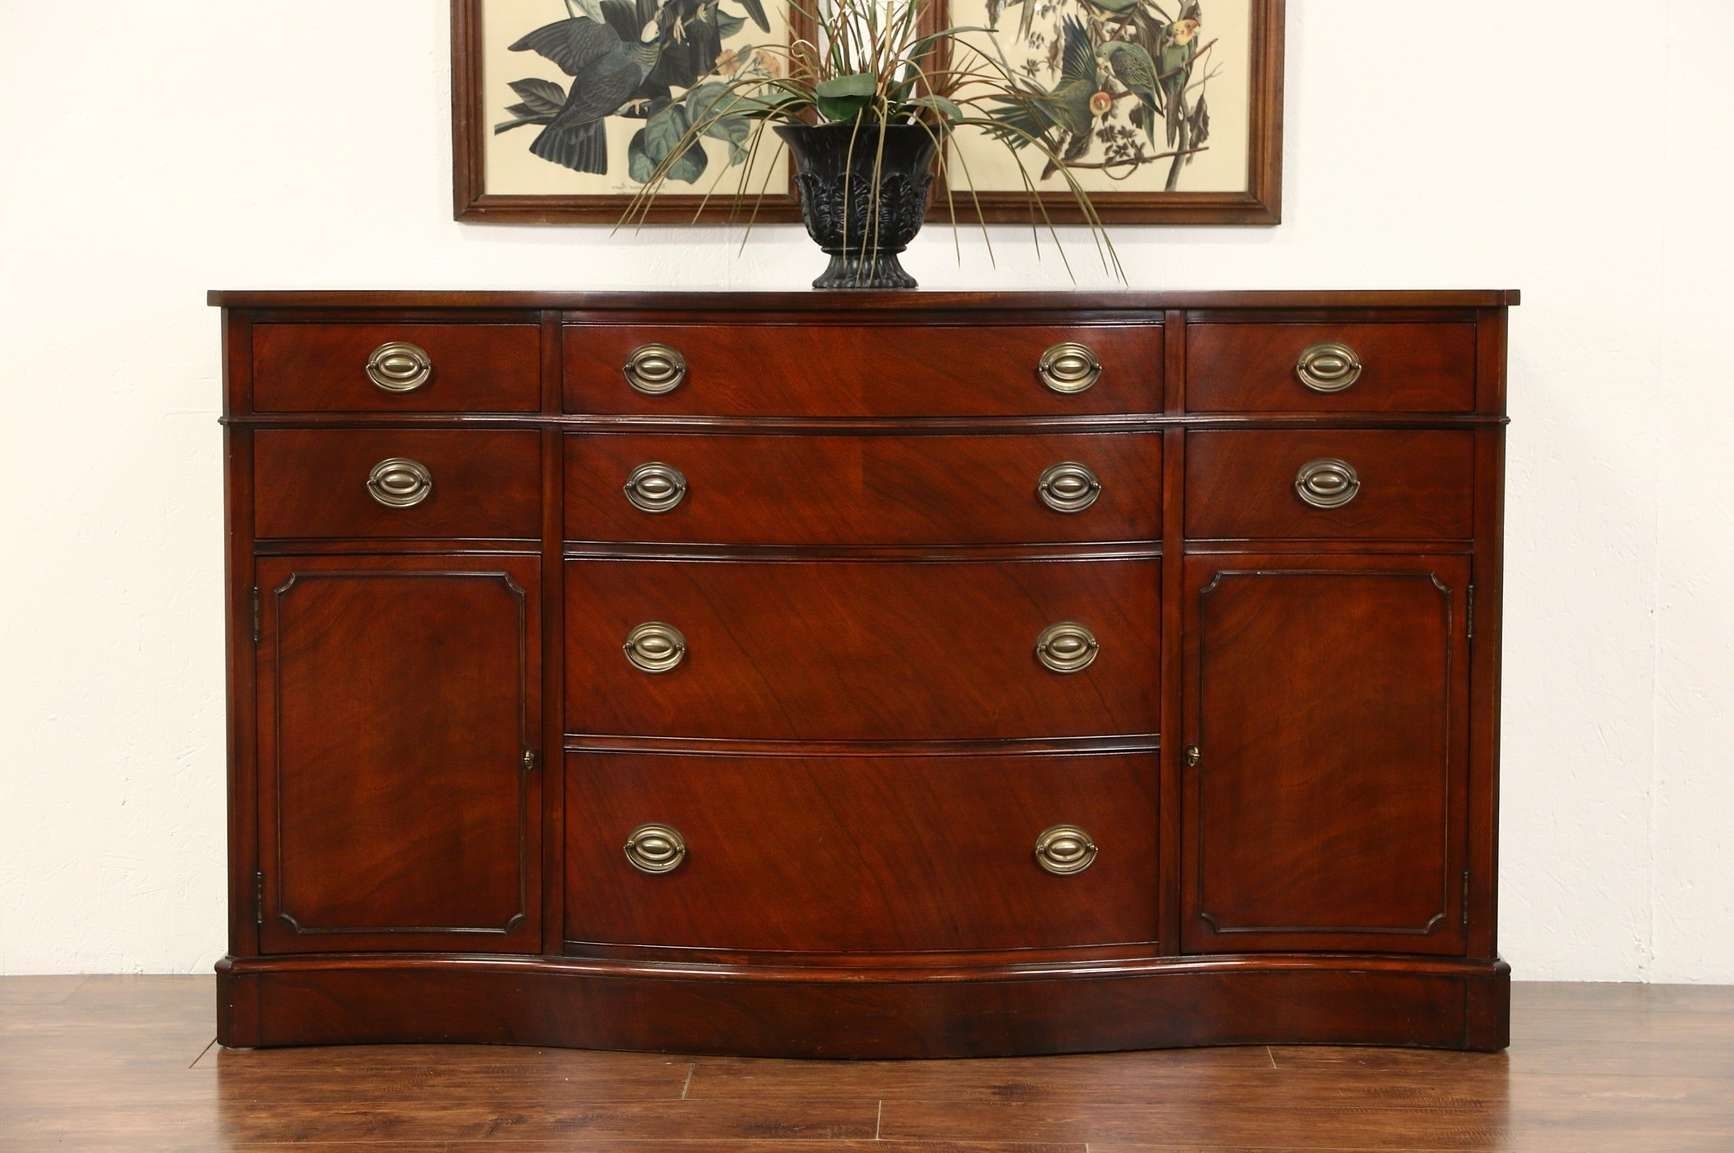 Sold – Drexel Travis Court Mahogany Sideboard, Buffet Or Server Pertaining To Mahogany Sideboards Buffets (View 6 of 20)